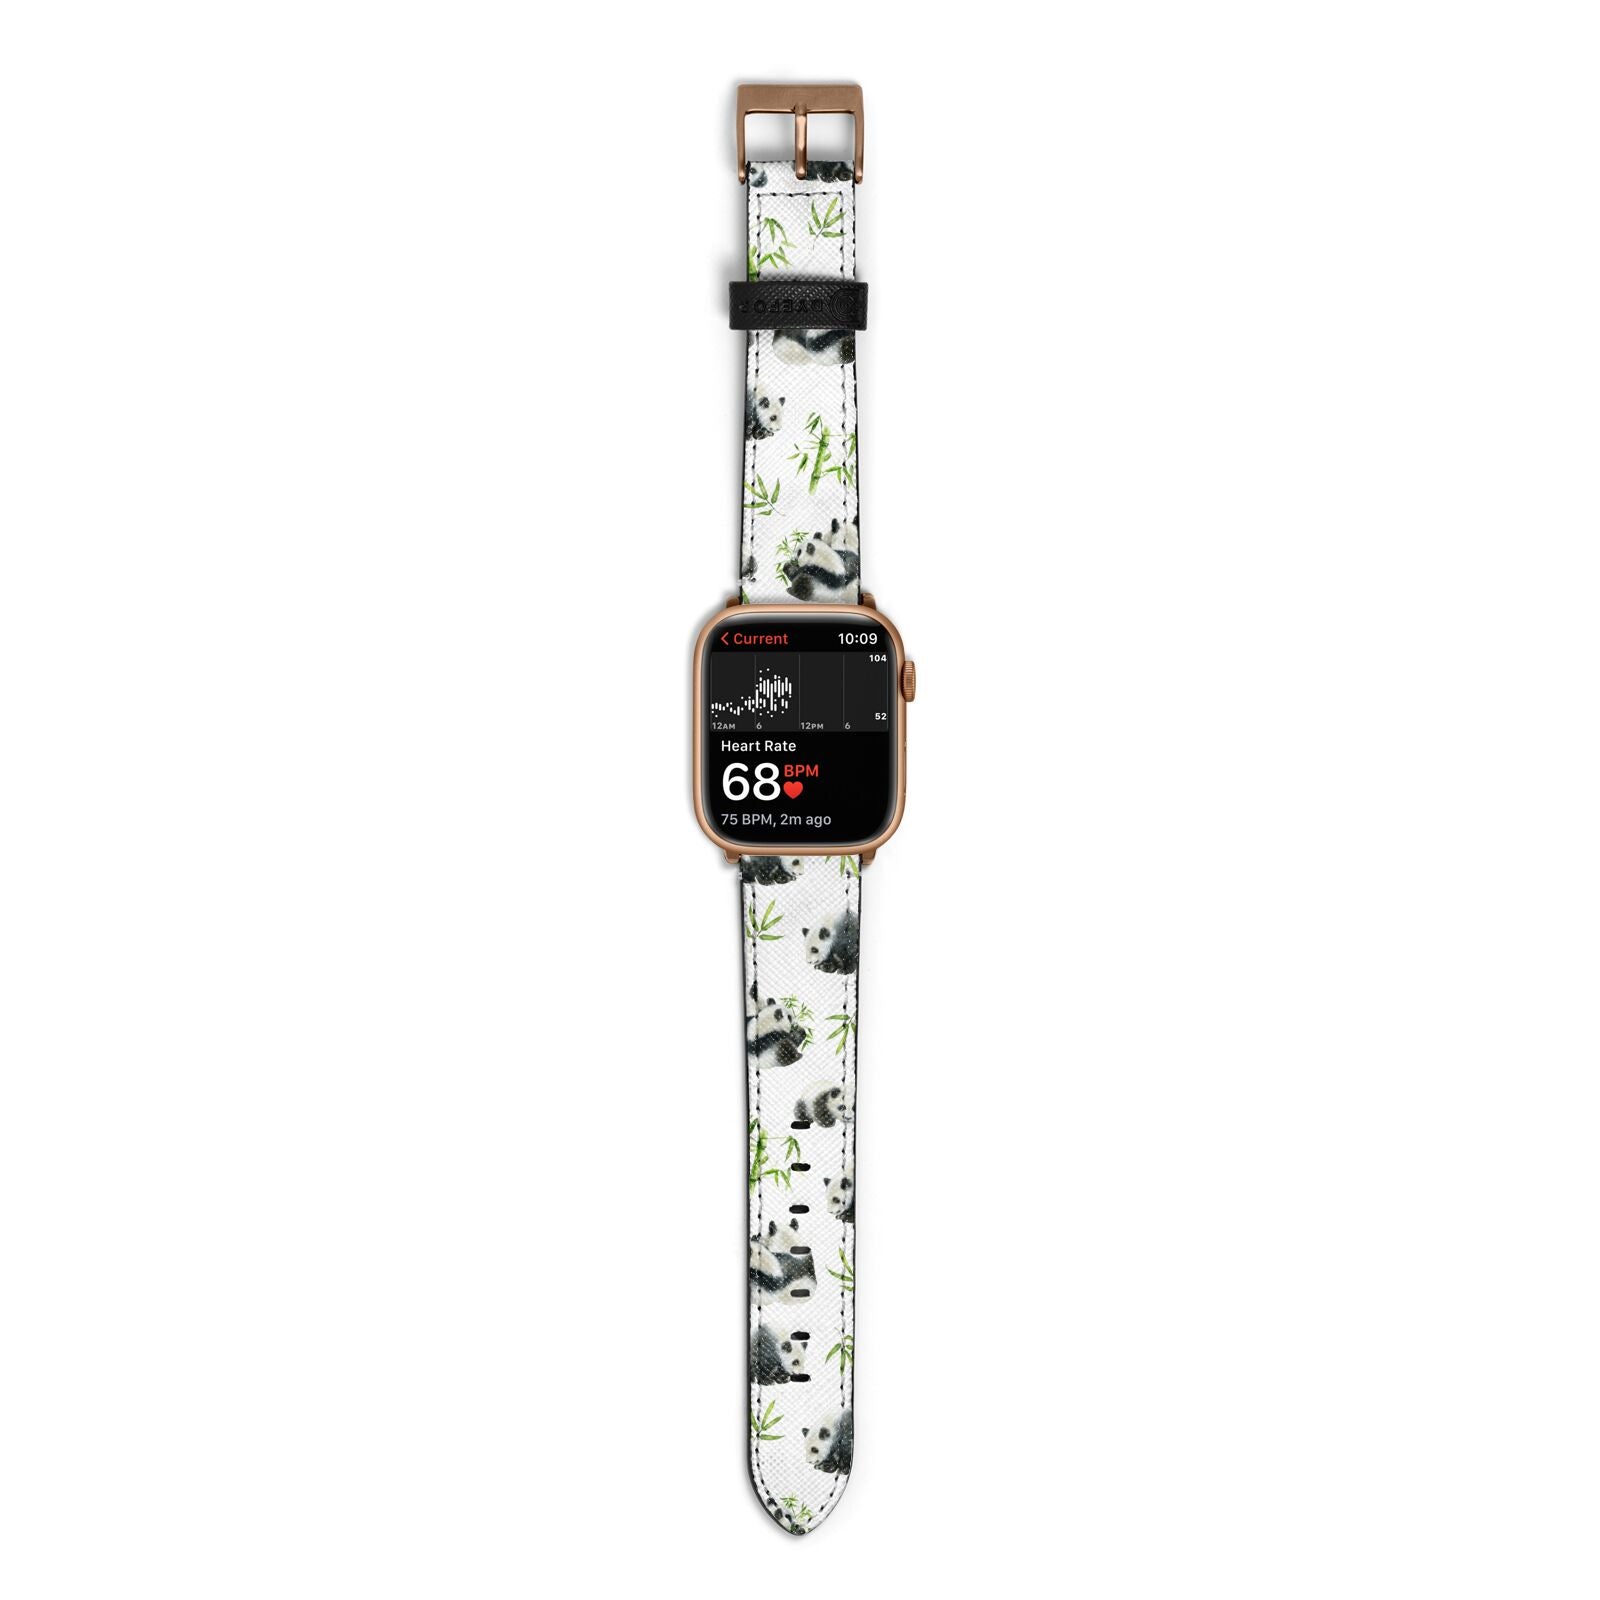 Panda Apple Watch Strap Size 38mm with Gold Hardware